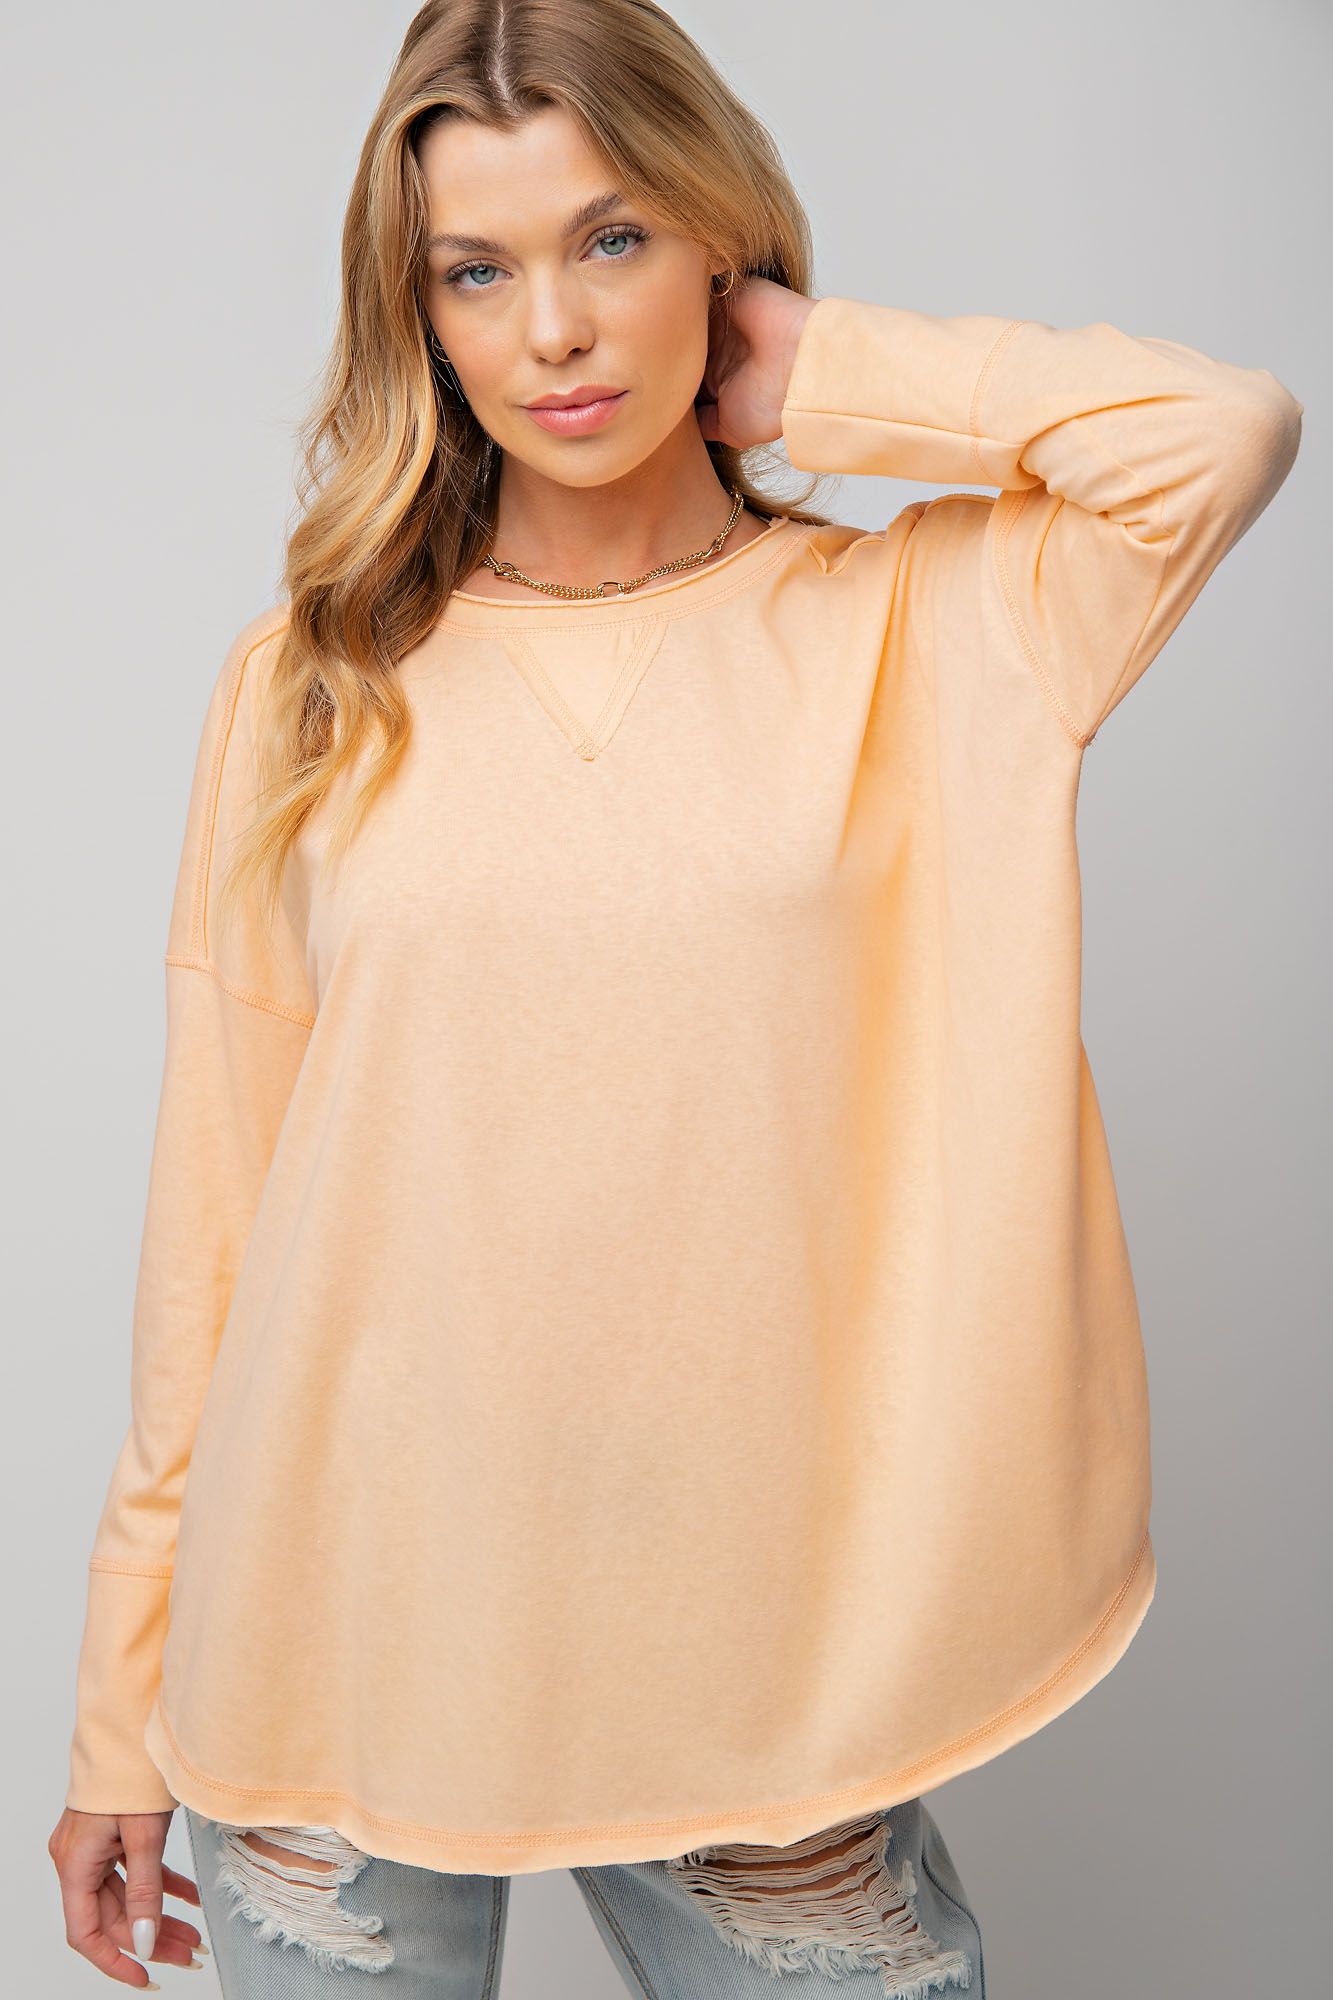 Easel Cotton Jersey Exposed Seam Raw Double Hem Loose Fit Tunic Top - Roulhac Fashion Boutique